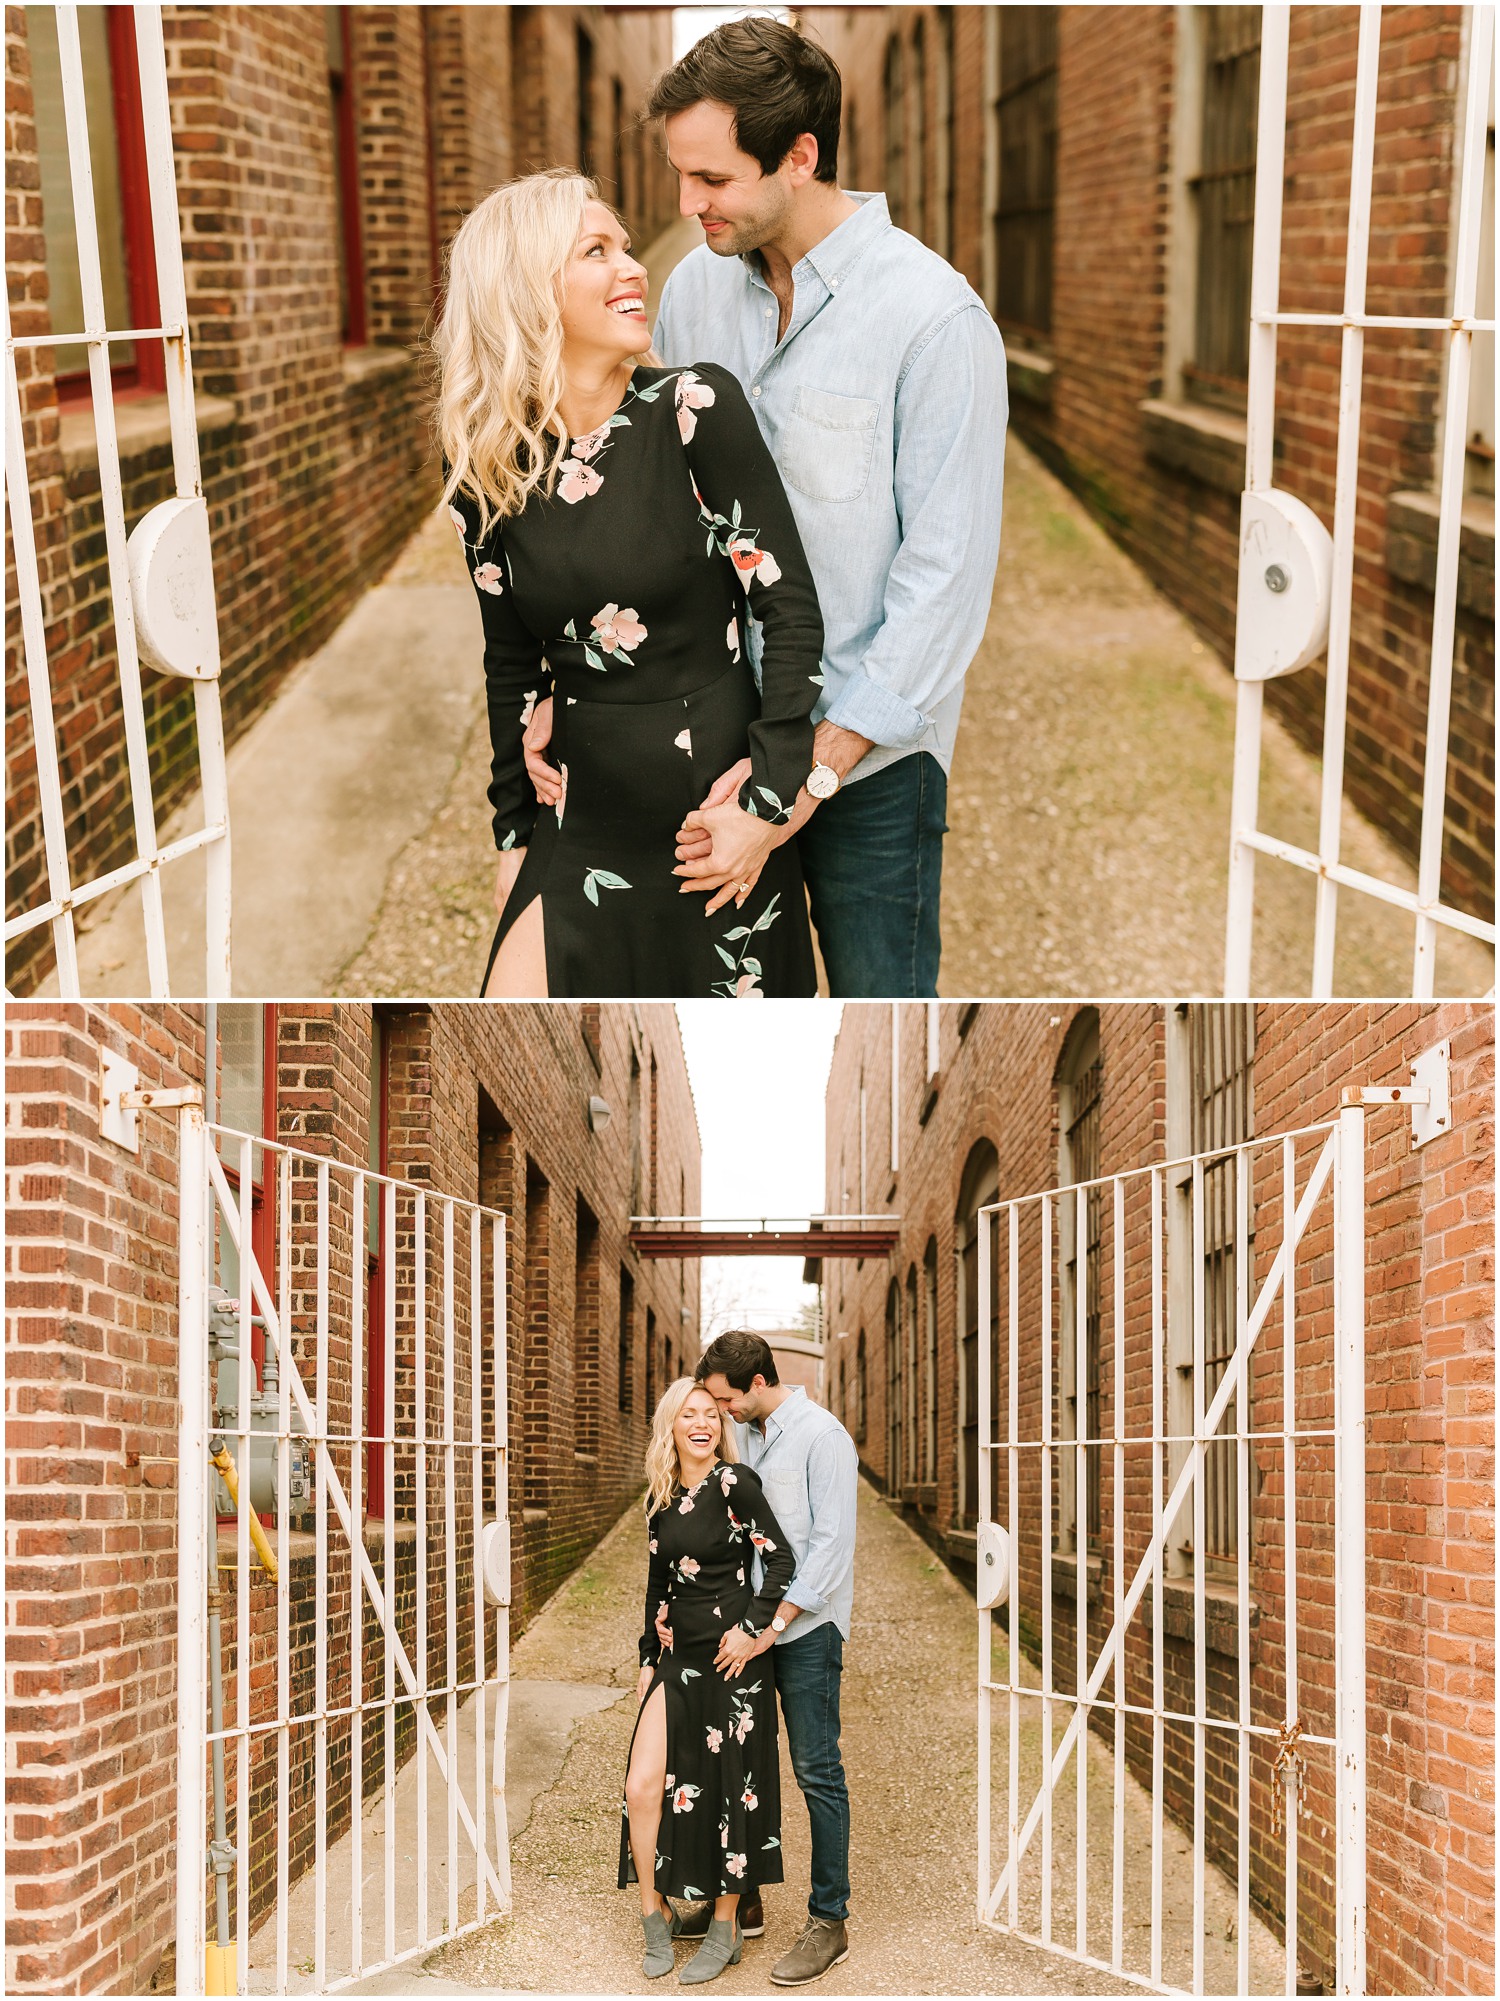 North Carolina engagement session in brick alley photographed by Chelsea Renay 